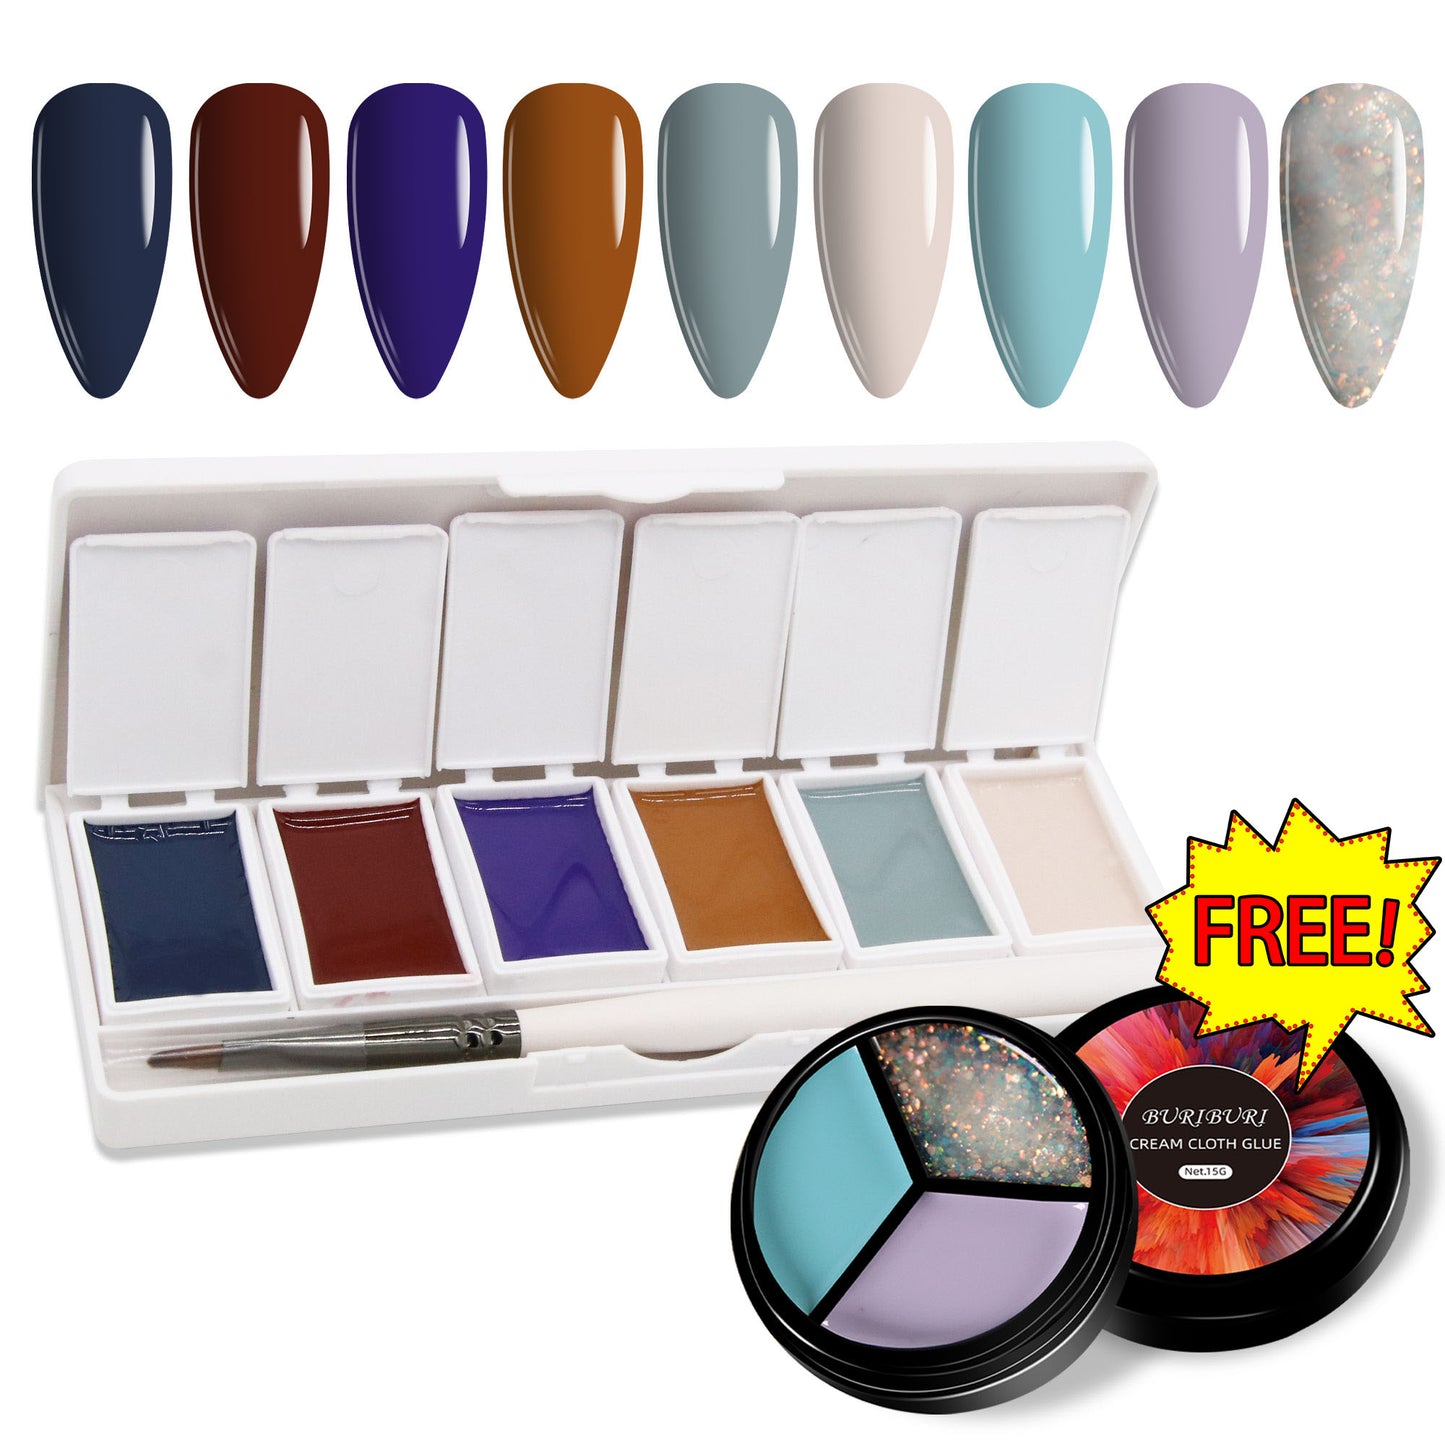 Dunhuang Mural 6-colors-in-1 + Free 3-colors-in-1 (#20) Solid Cream Gel Polish